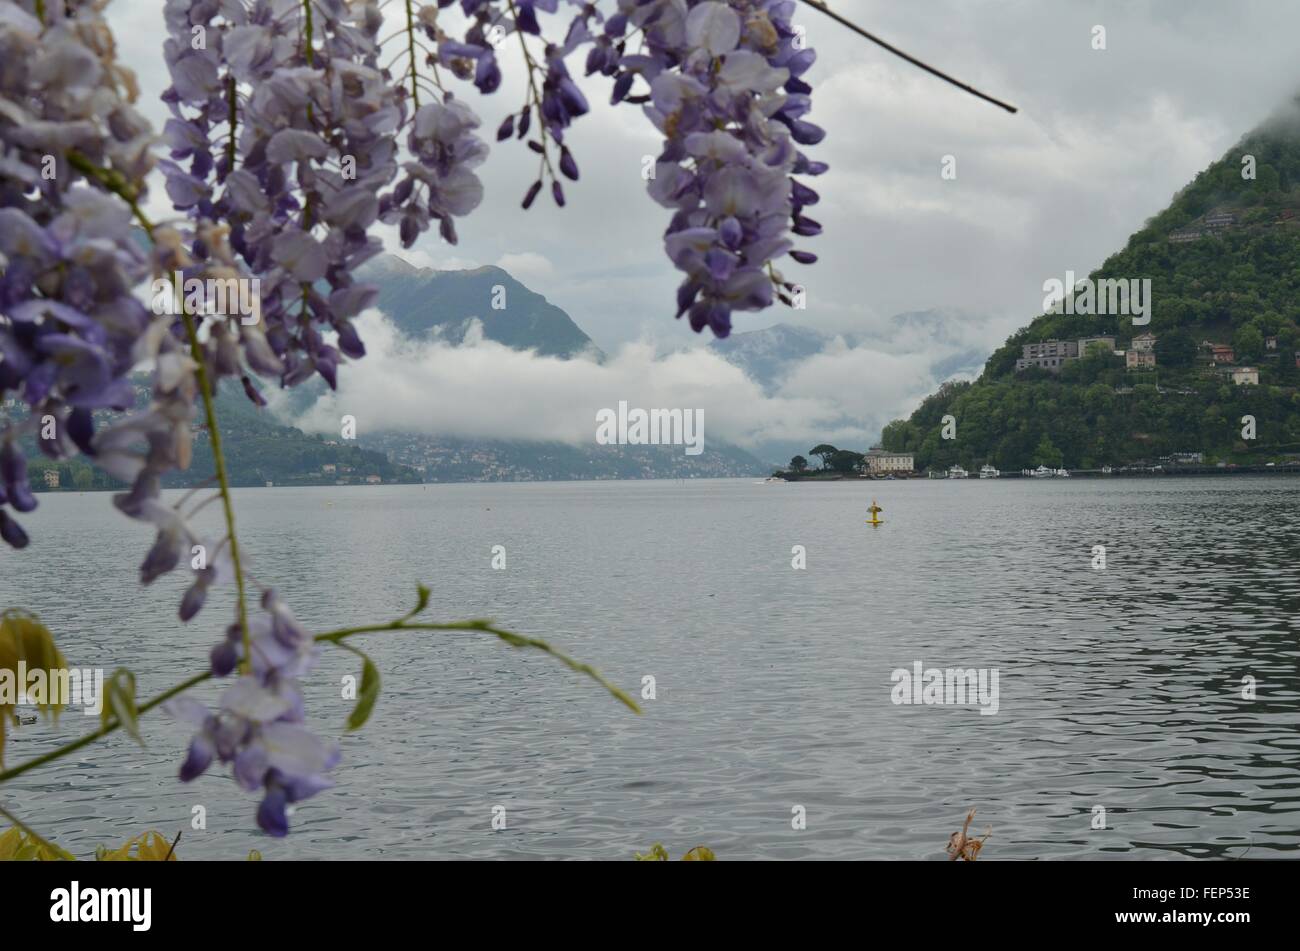 Close-Up Of Purple Wisteria Flowers With Mountain In Background Stock Photo